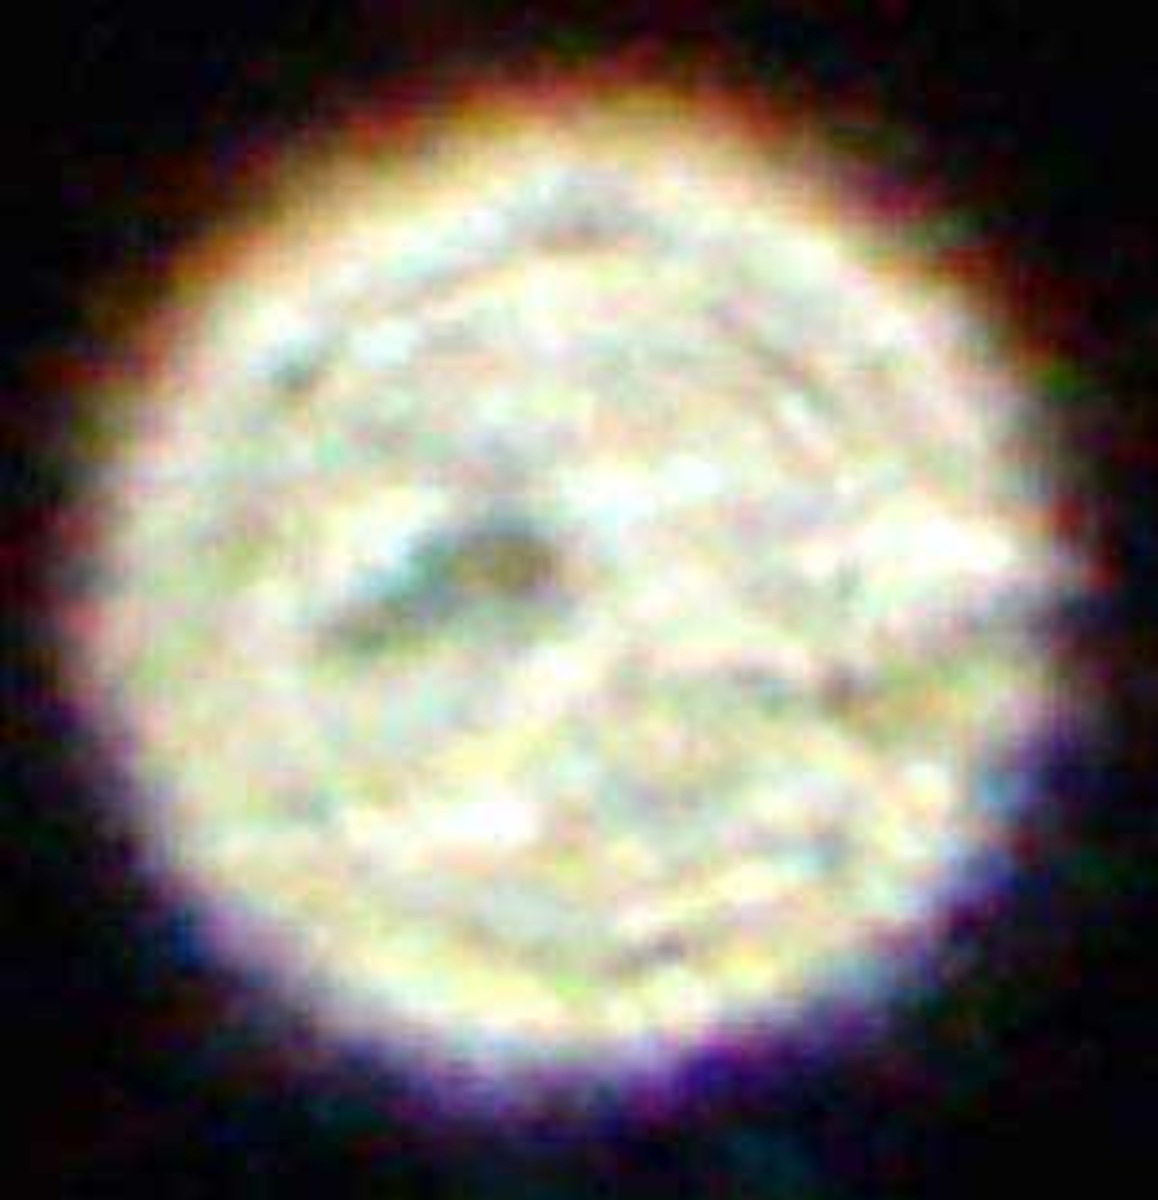 So, what do you see in this orb? Share your opinions in the comments below. 